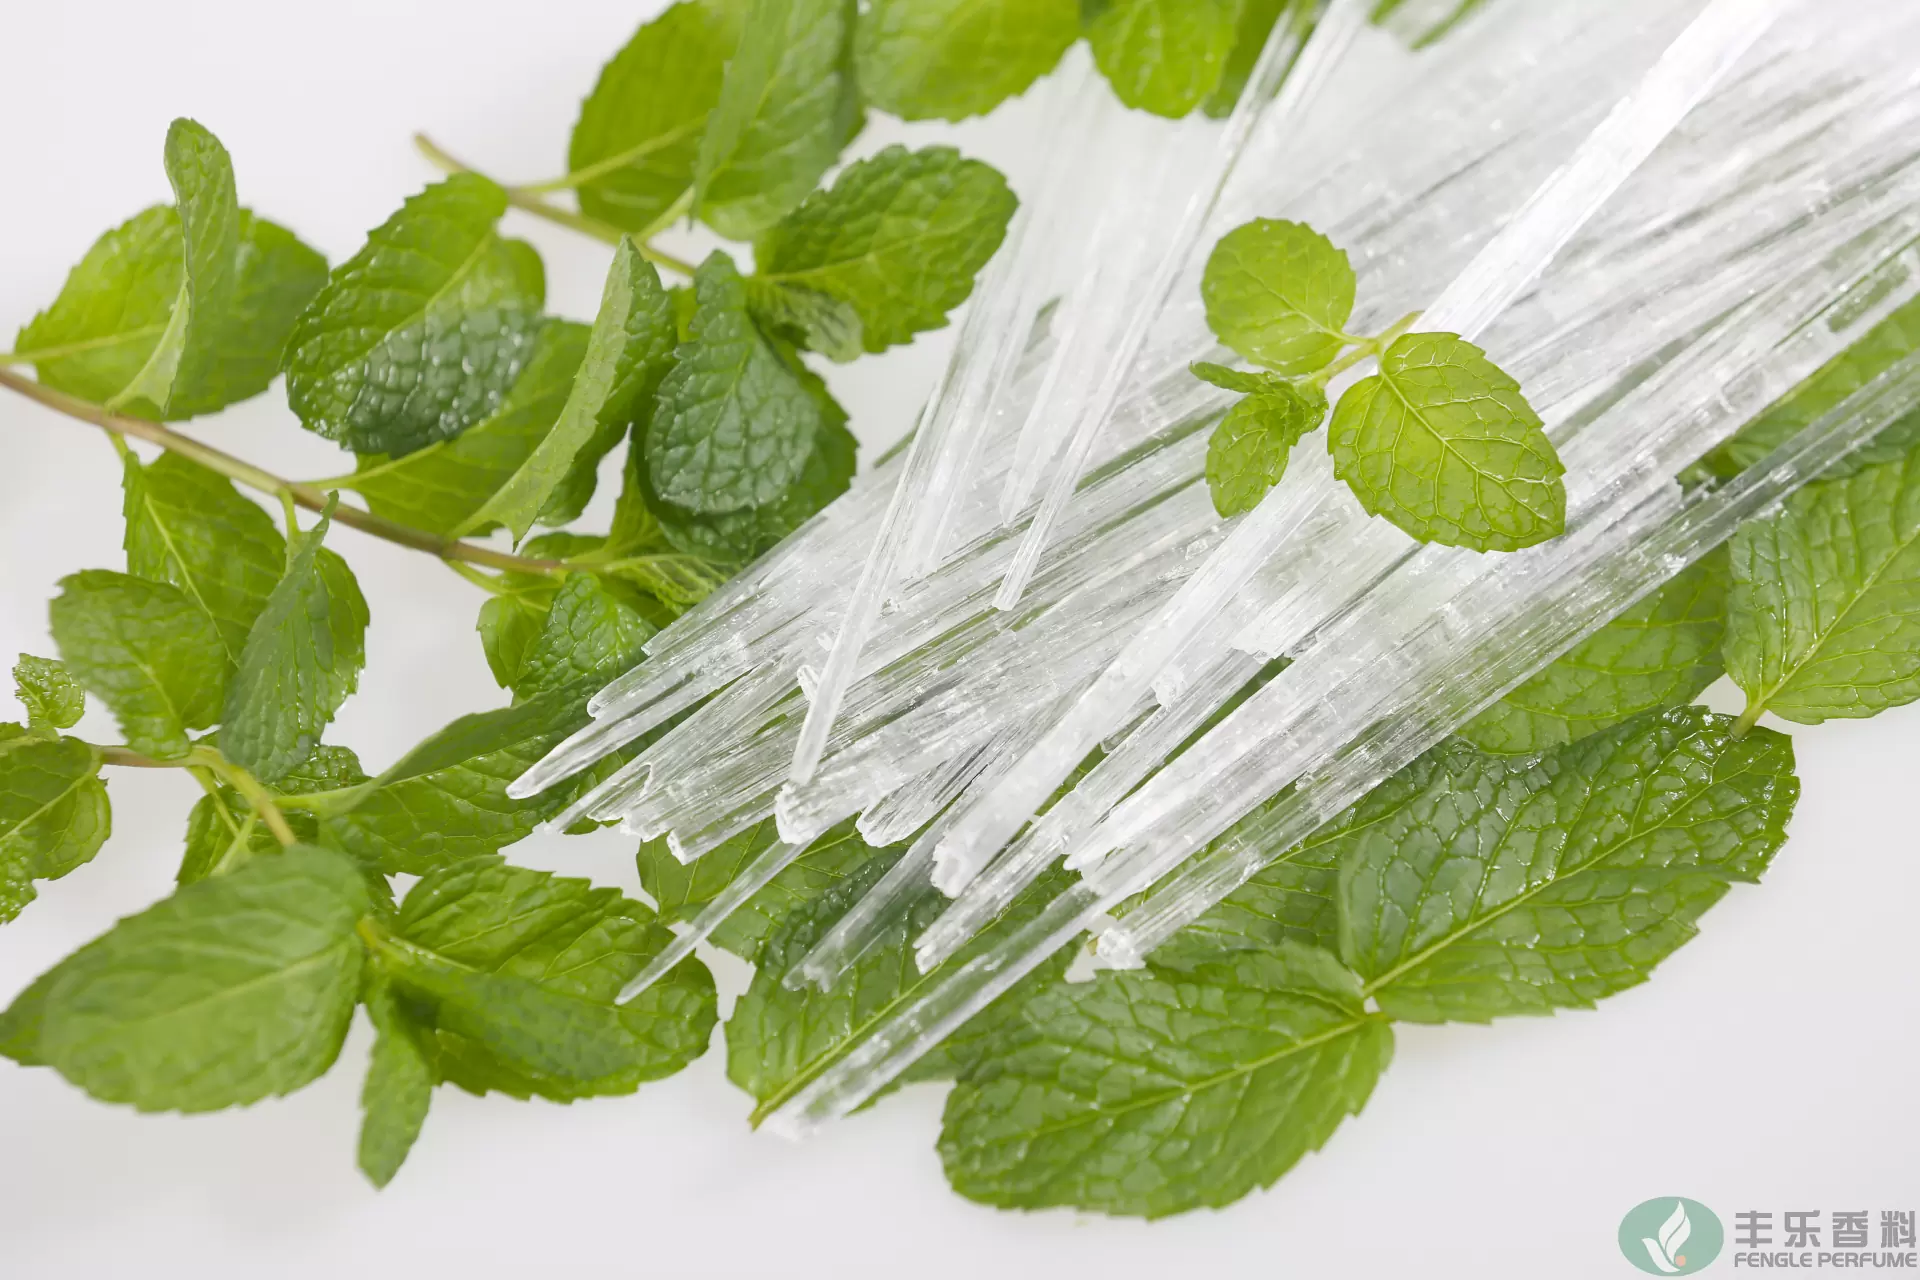 menthol crystals manufacturers - Anhui Fengle Perfume Co., Ltd.